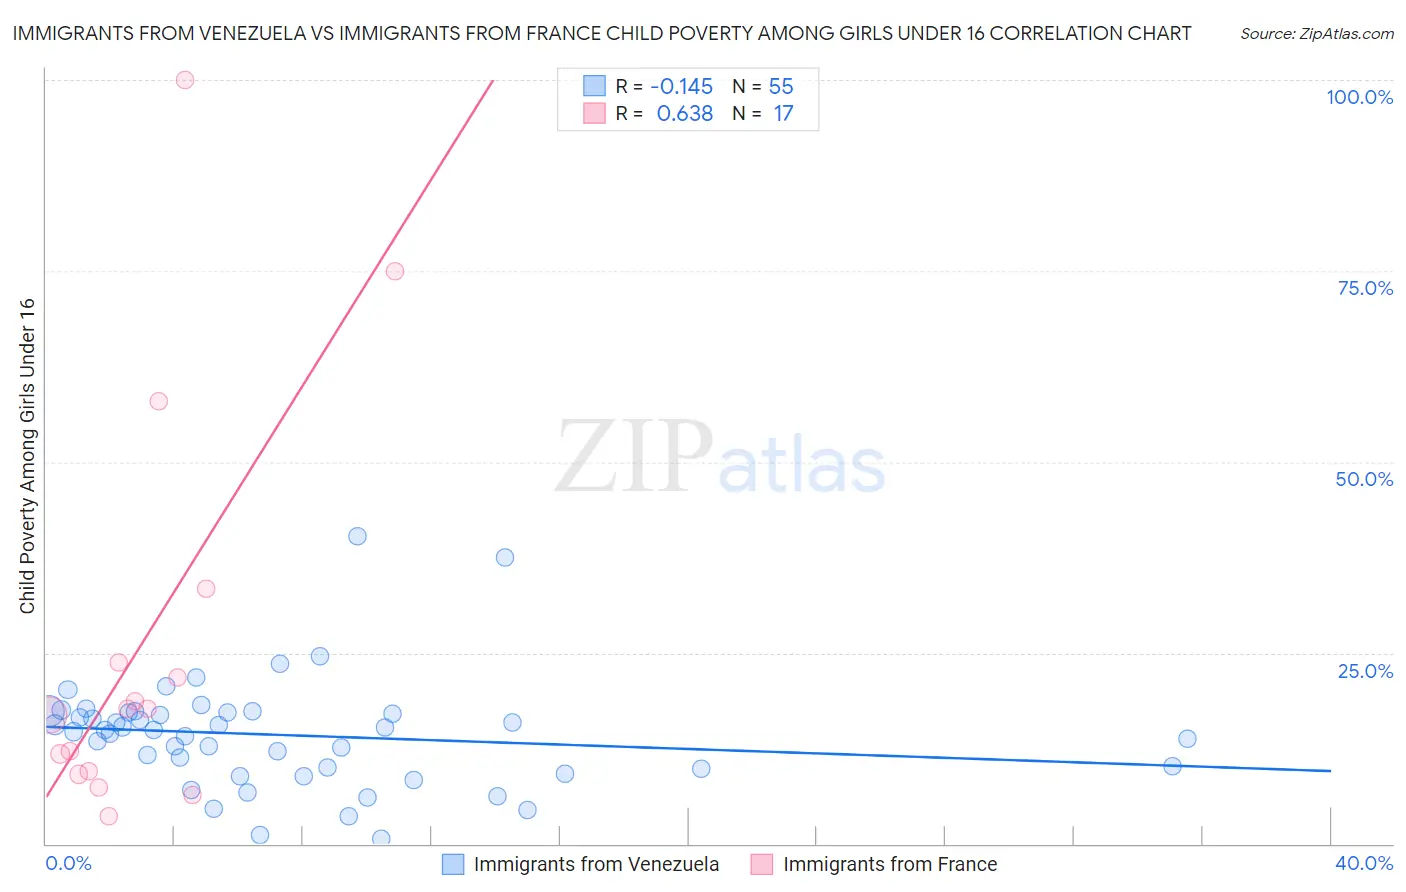 Immigrants from Venezuela vs Immigrants from France Child Poverty Among Girls Under 16